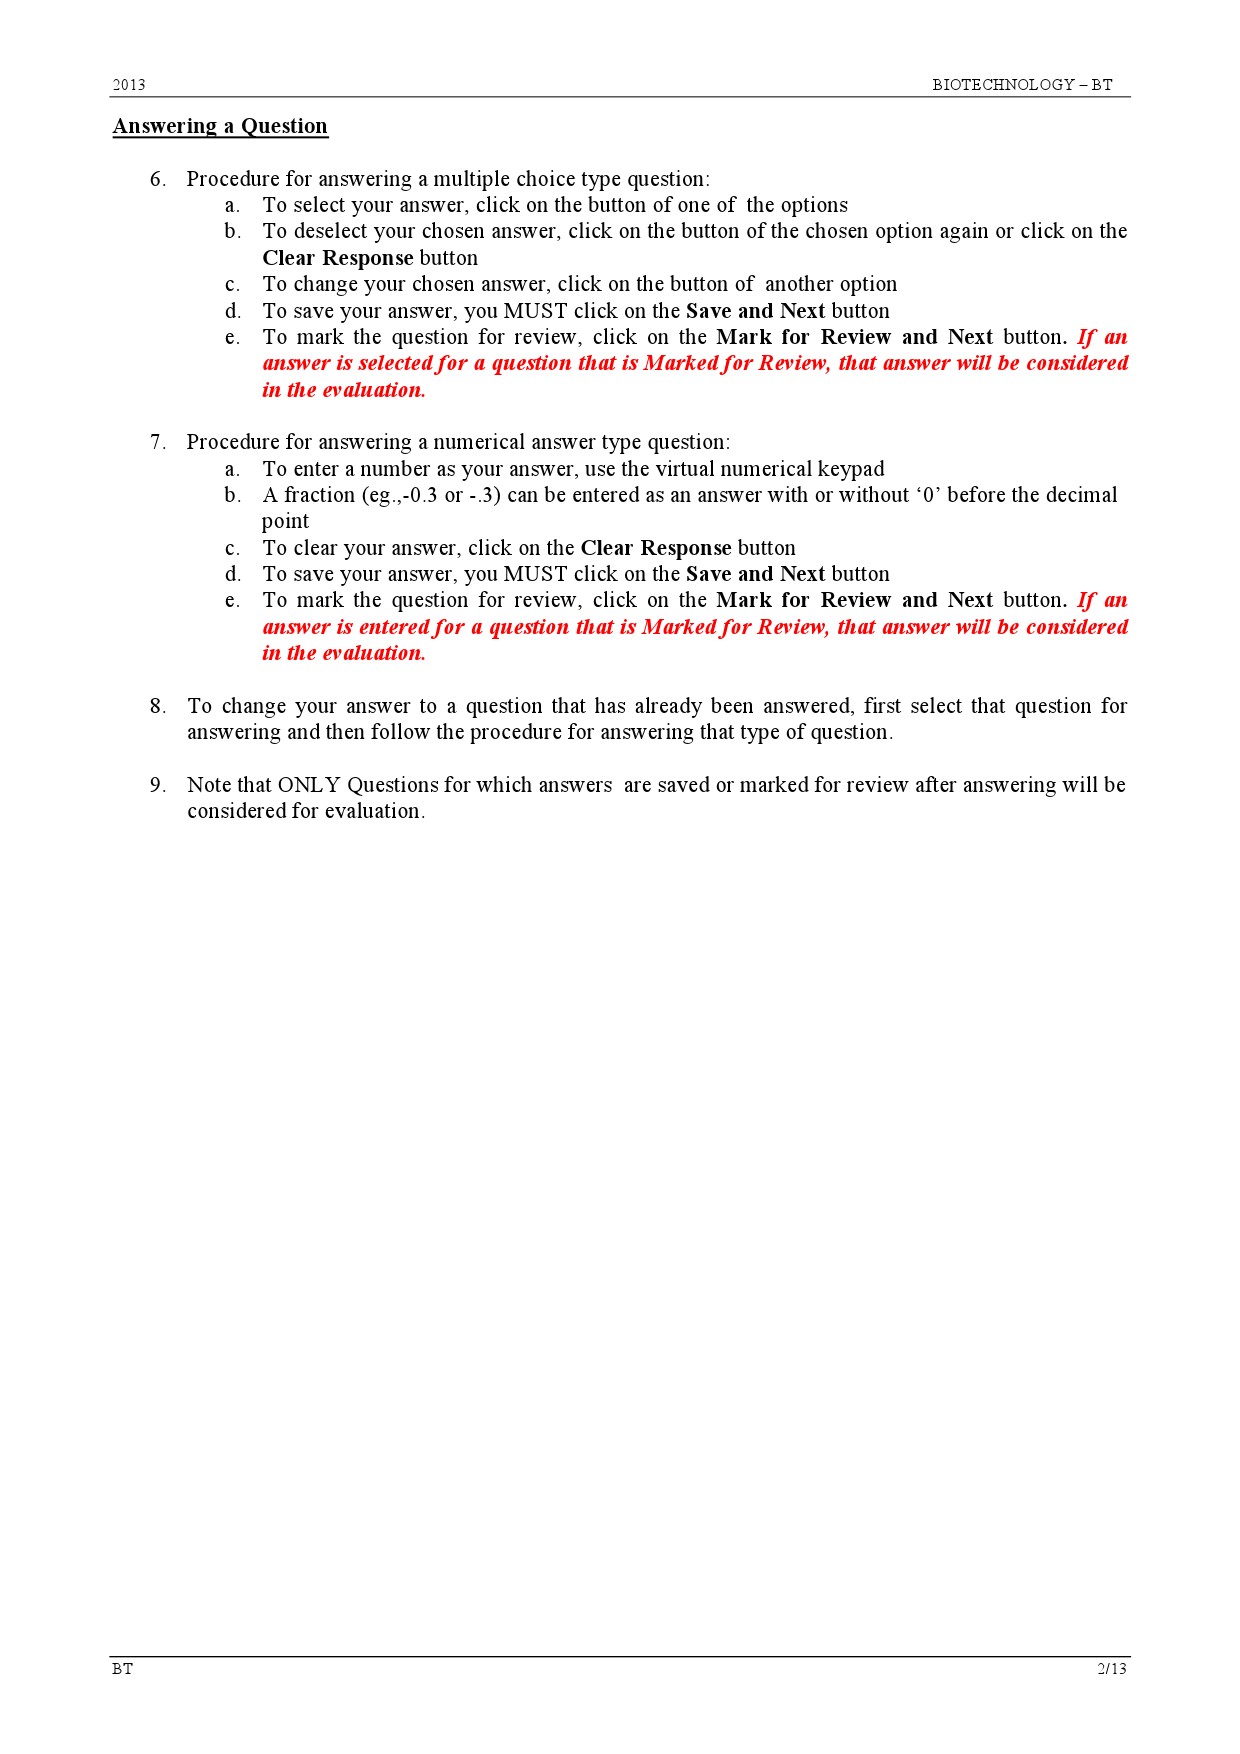 GATE Exam Question Paper 2013 Biotechnology 2